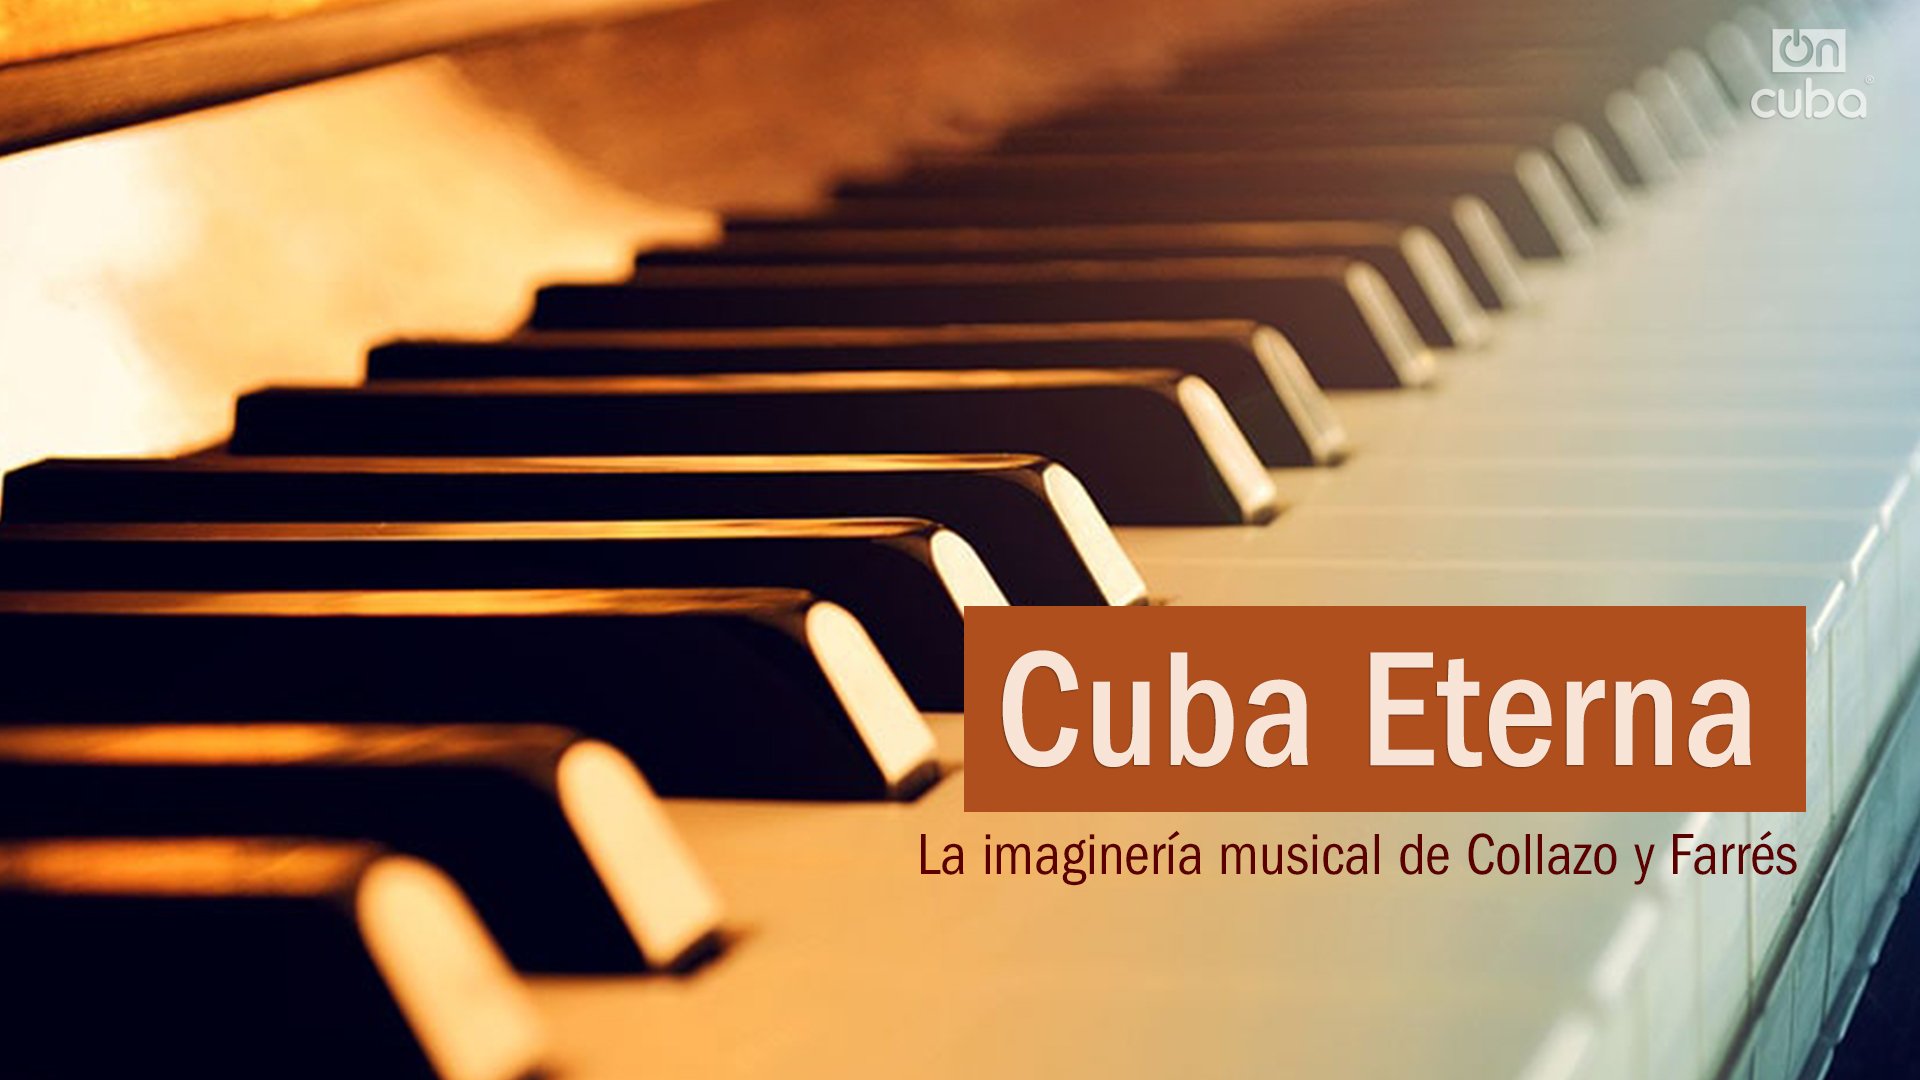 Cuba Eterna: The musical imagery of Collazo and Farrés